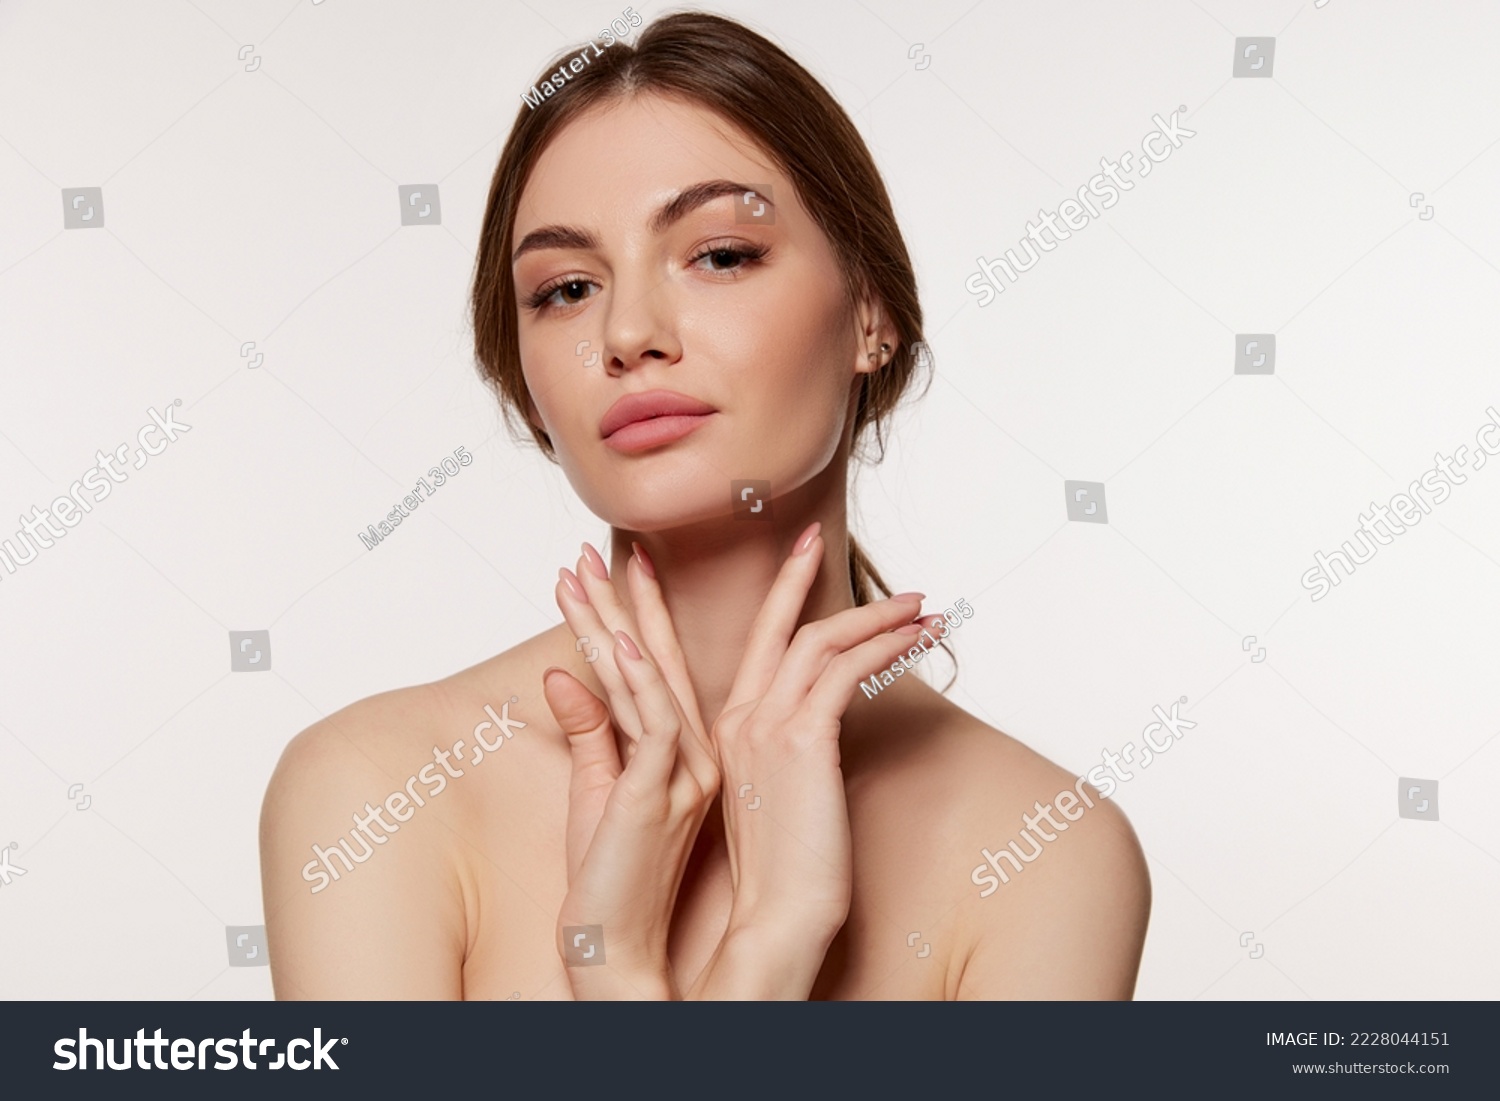 Portrait of young beautiful woman with perfect smooth skin isolated over white background. Facebuilding. Concept of natural beauty, plastic surgery, cosmetology, cosmetics, skin care #2228044151